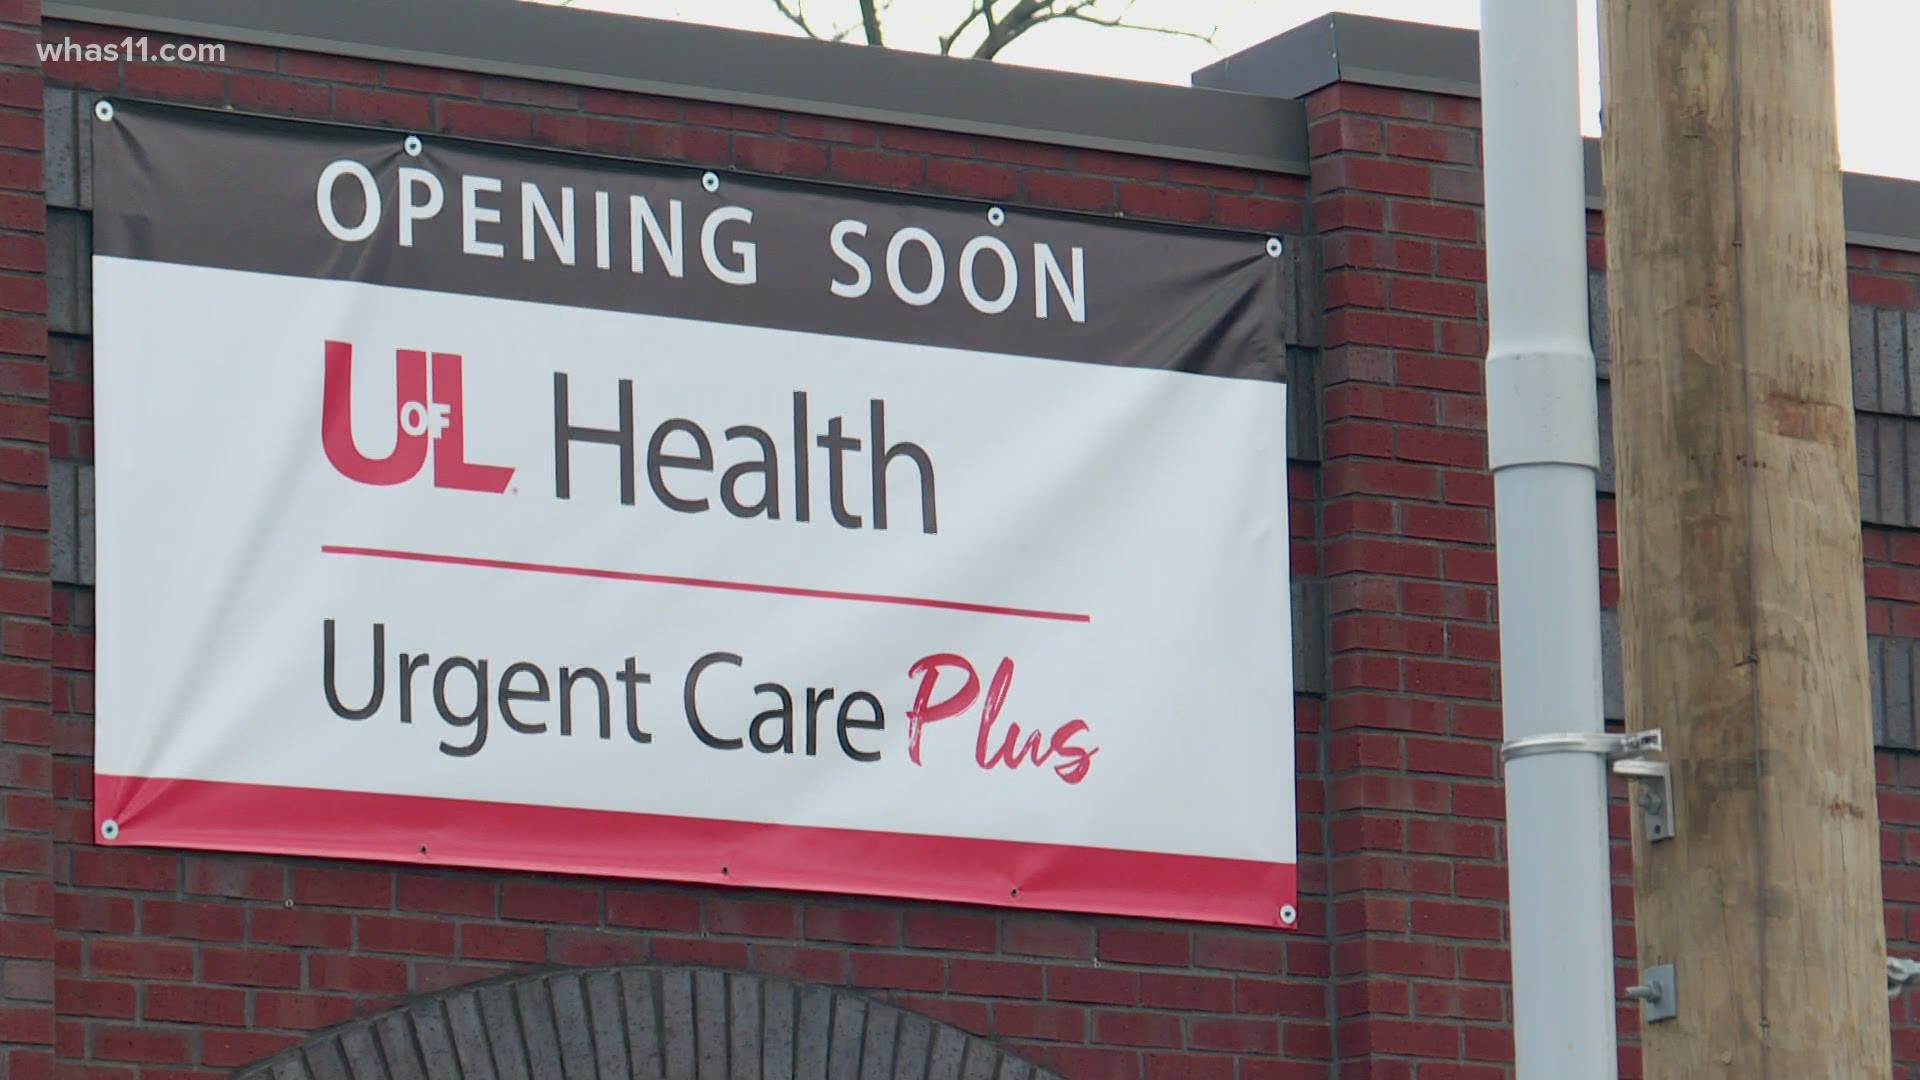 For decades, West Louisville has been deemed medically underserved. Now, UofL Health is taking a small step to bringing quality healthcare to the area.